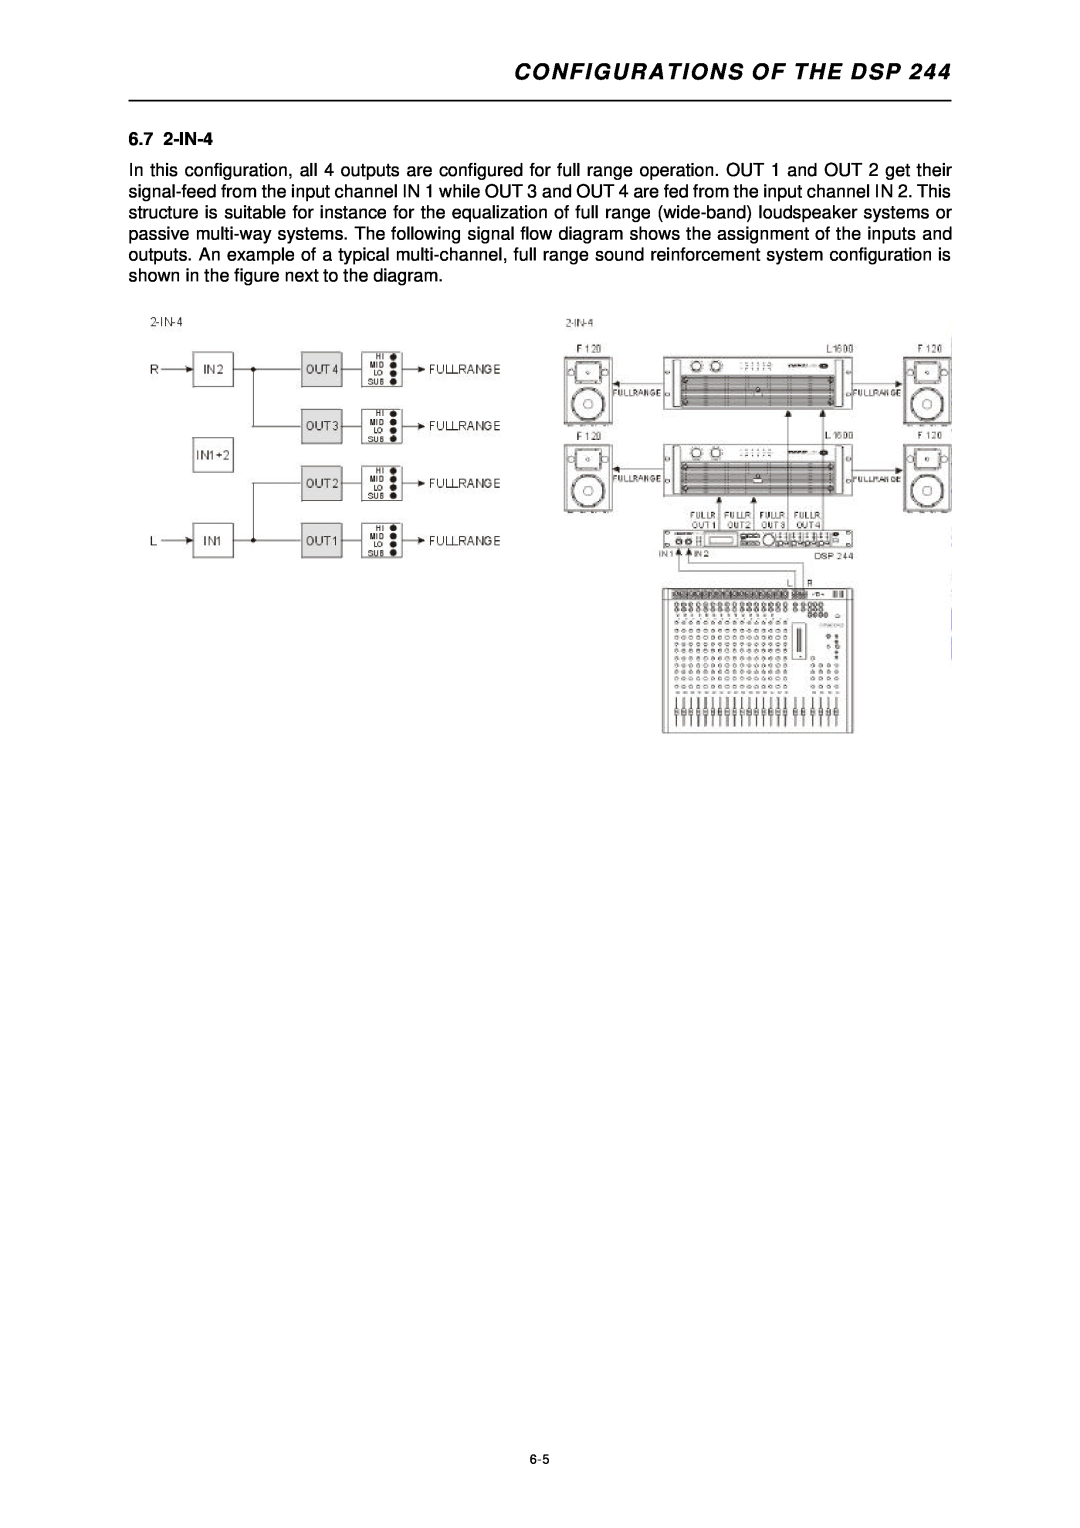 Dynacord DSP 244 owner manual 6.7 2-IN-4, Configurations Of The Dsp 